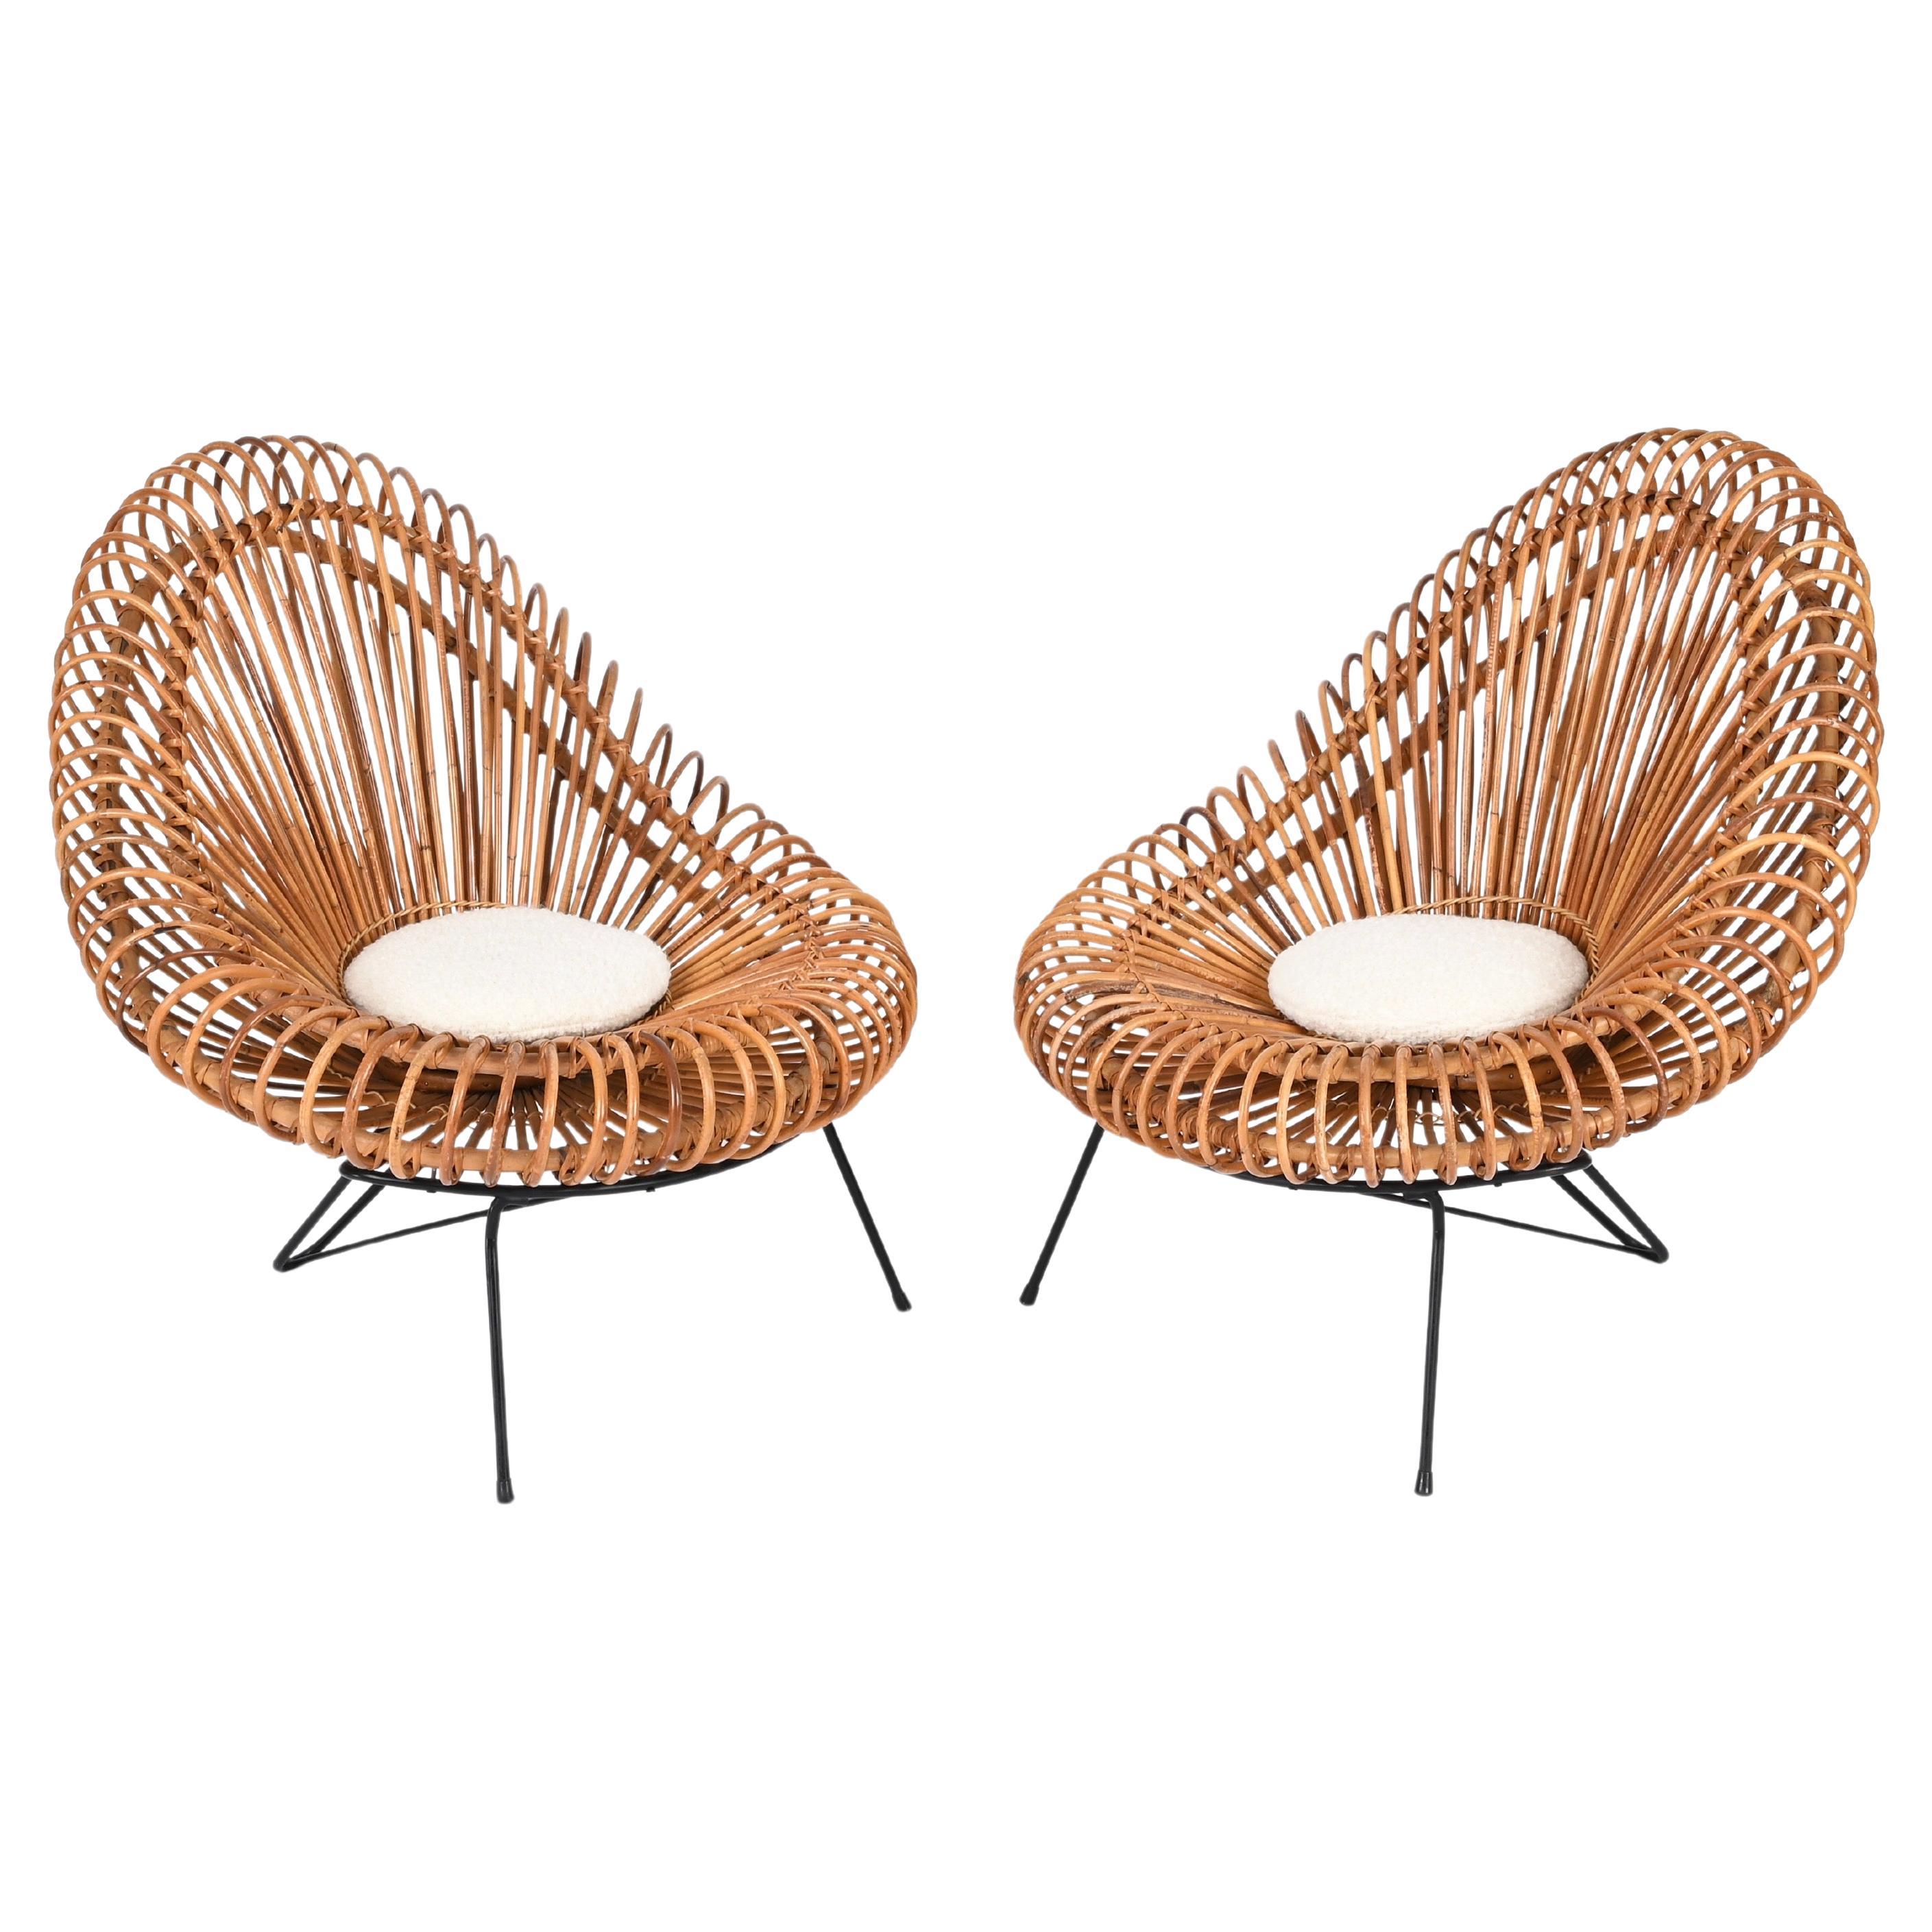 Pair of Sculptural Rattan Lounge Chairs by J. Abraham and Dirk Rol, France 1950 